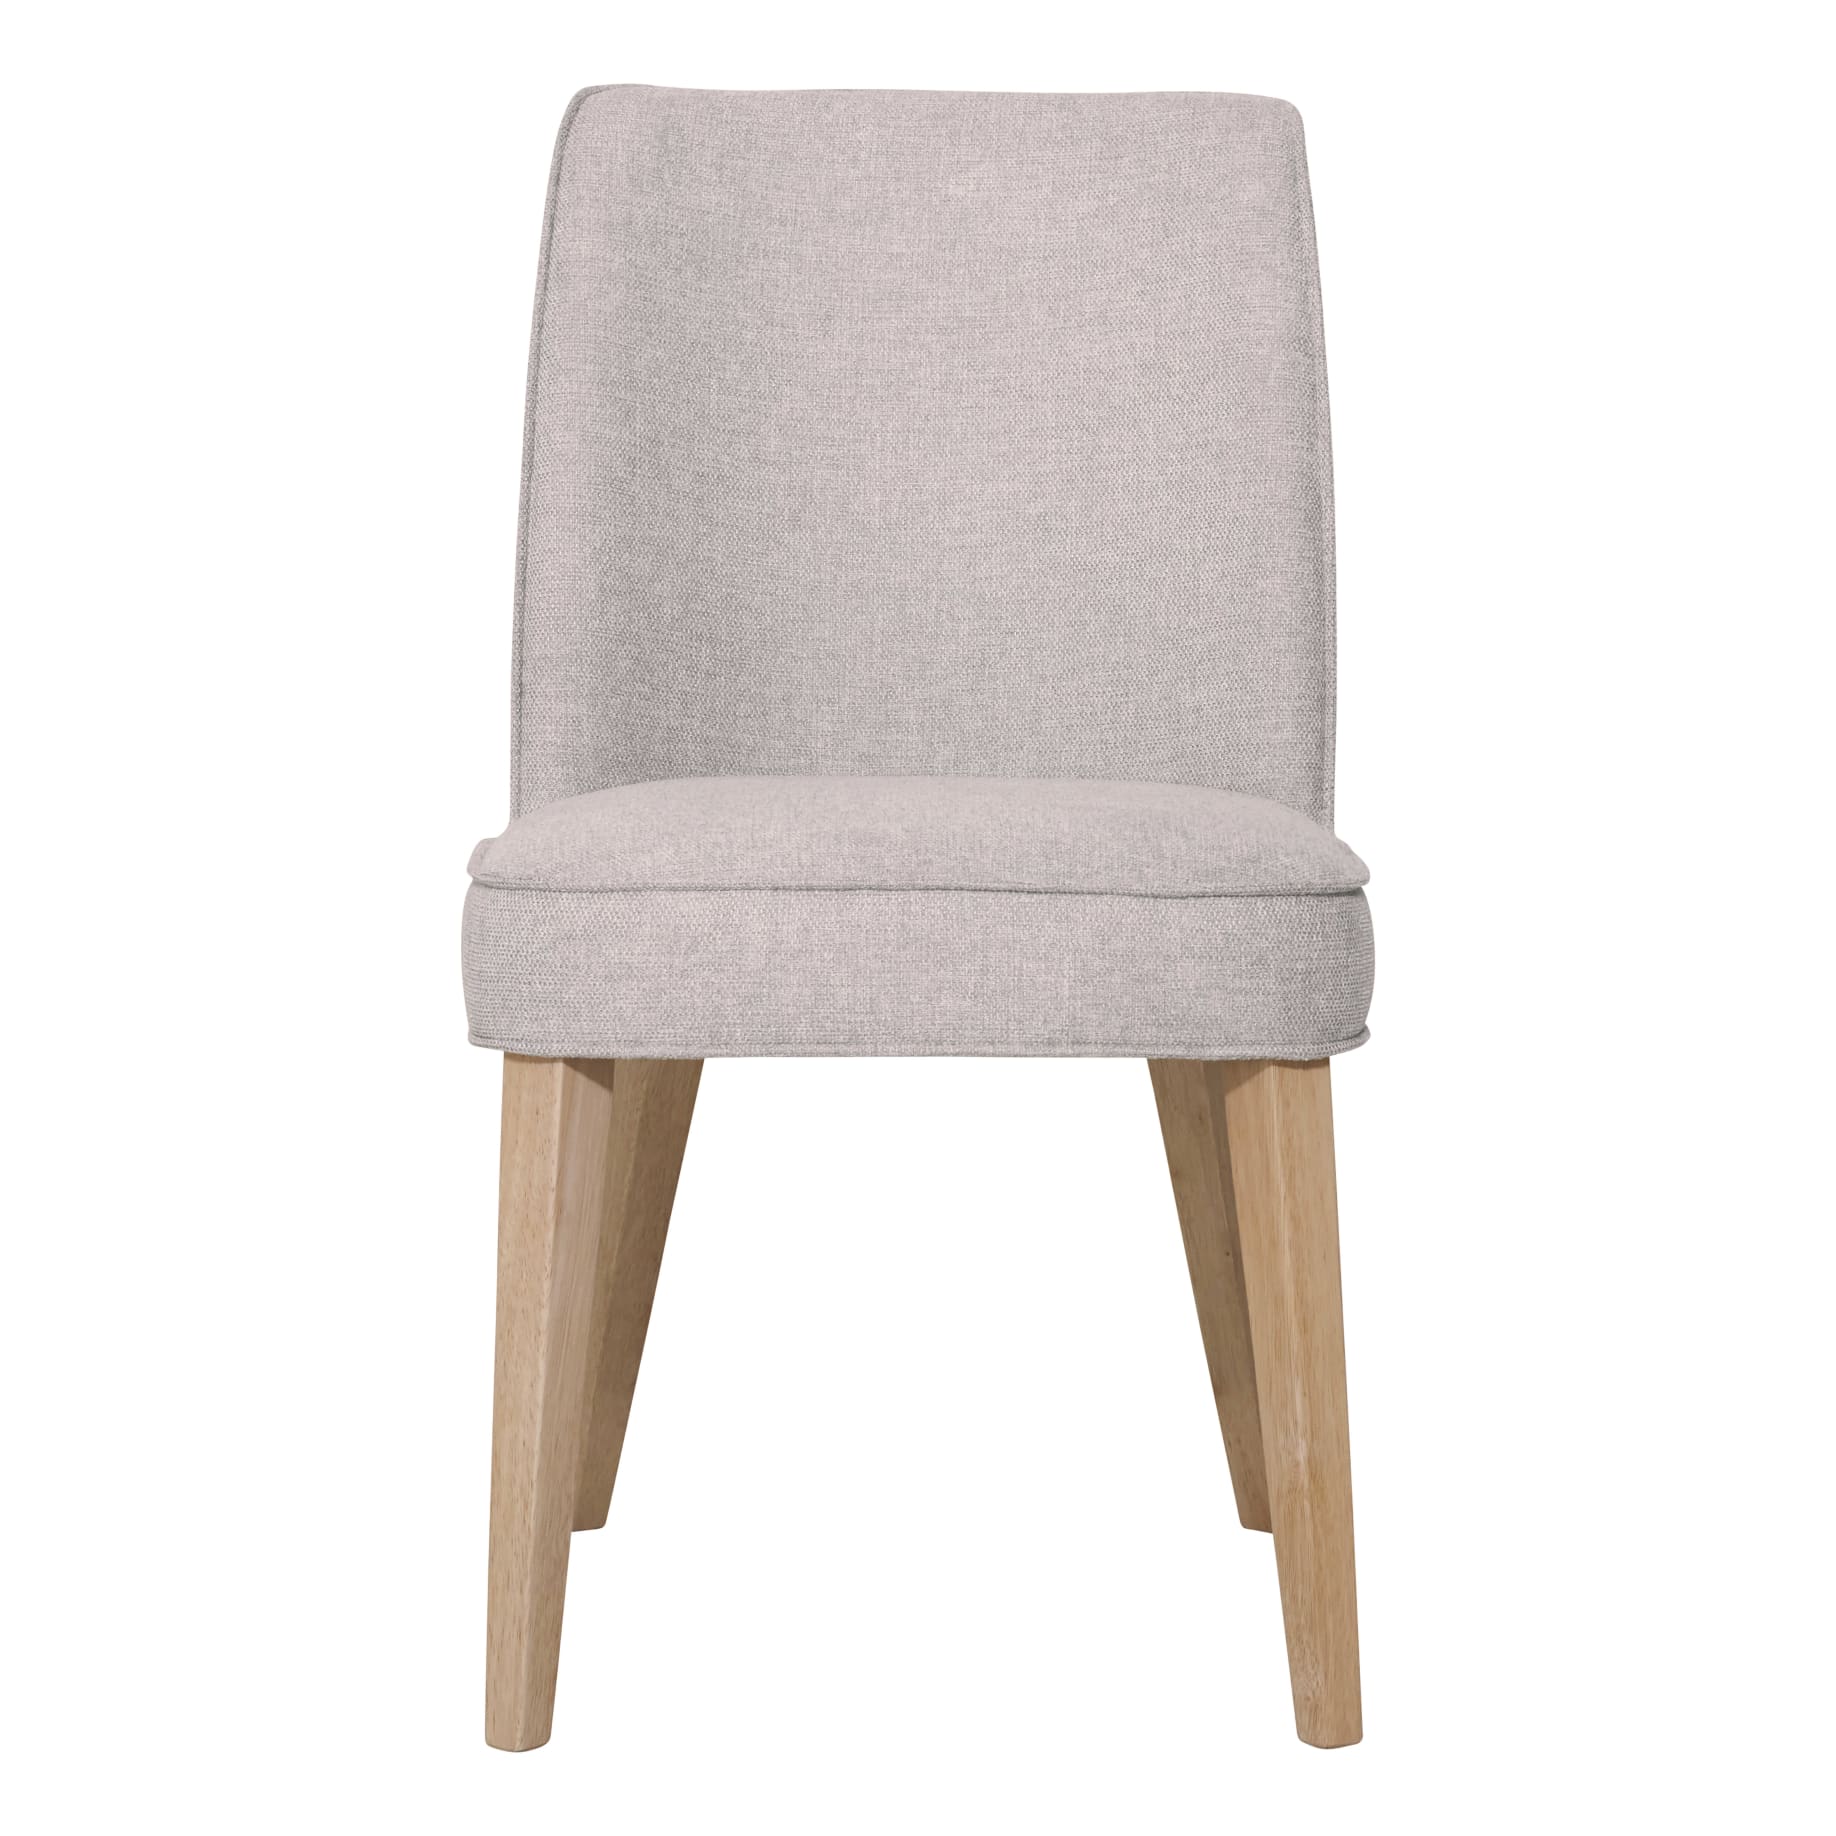 Hogan Dining Chair in Belfast Beige / Clear Lacquer